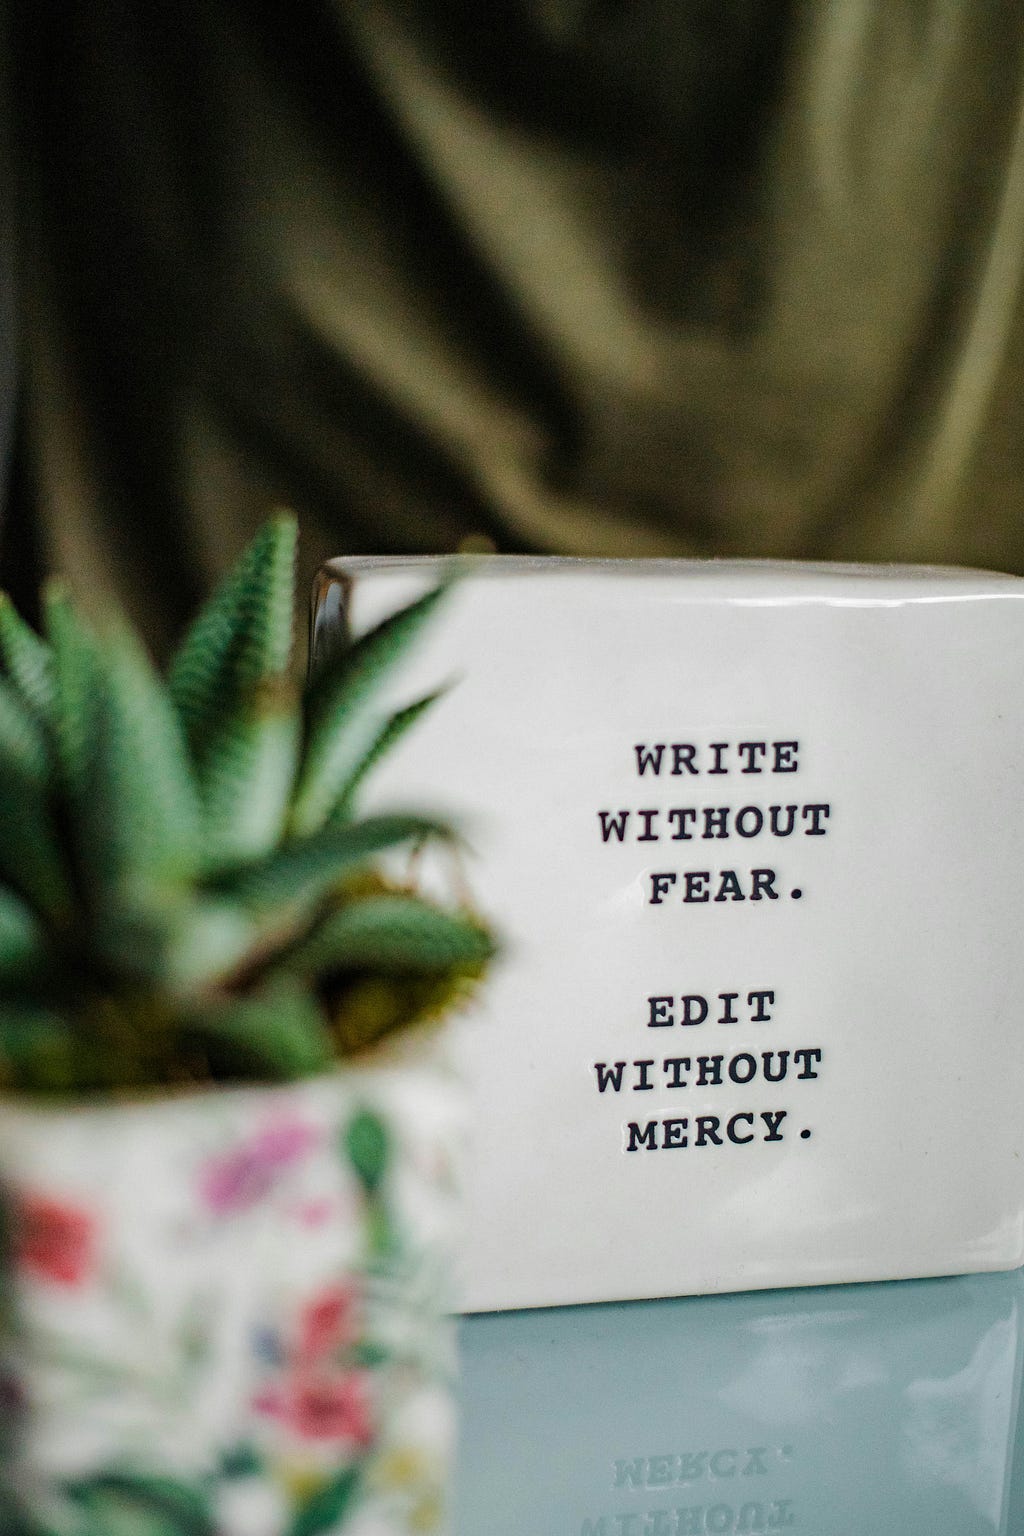 A color photograph — The backdrop is a olive green drape, a potted plant is in the foreground, the focus is a typewritten sign that states in all caps: WRITE WITHOUT FEAR. EDIT WITHOUT MERCY.